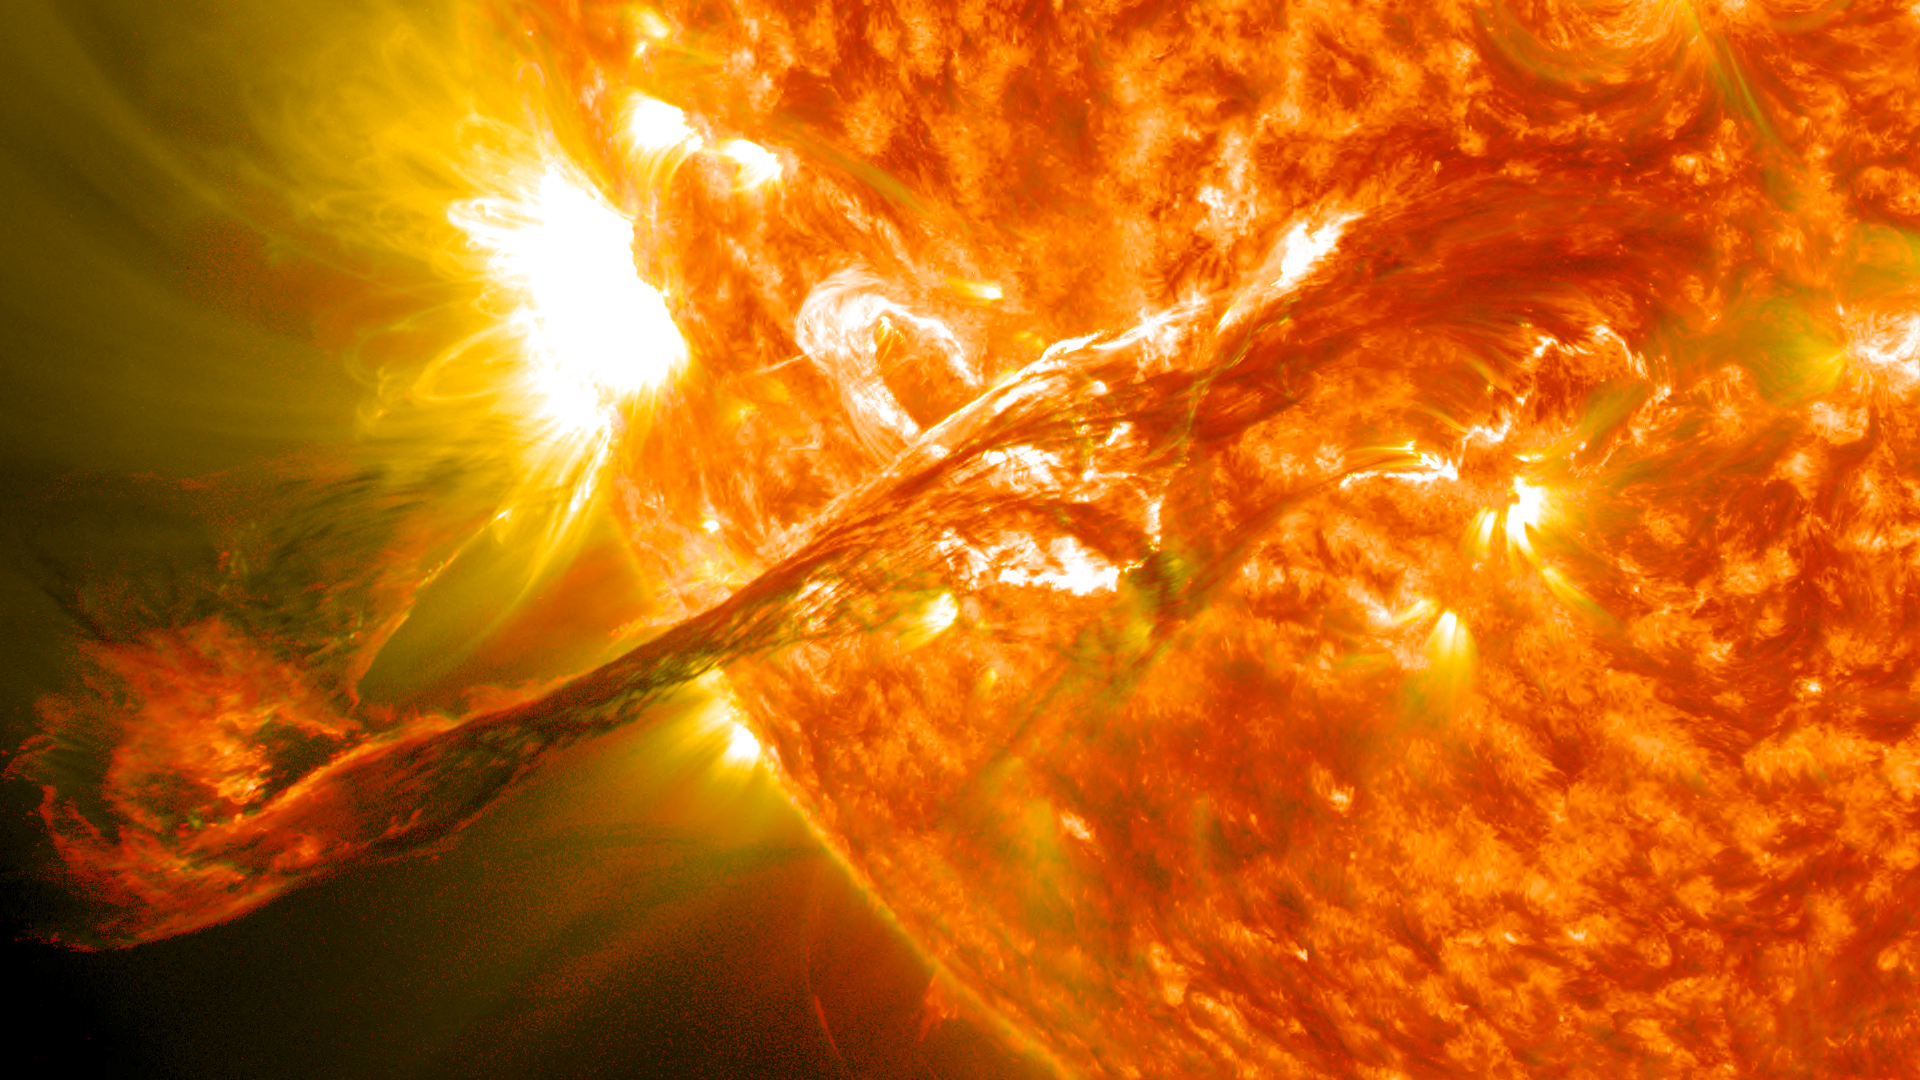 Resolution Image Solar Flare 1920x1080p HD Space Astronomy Wallpaper